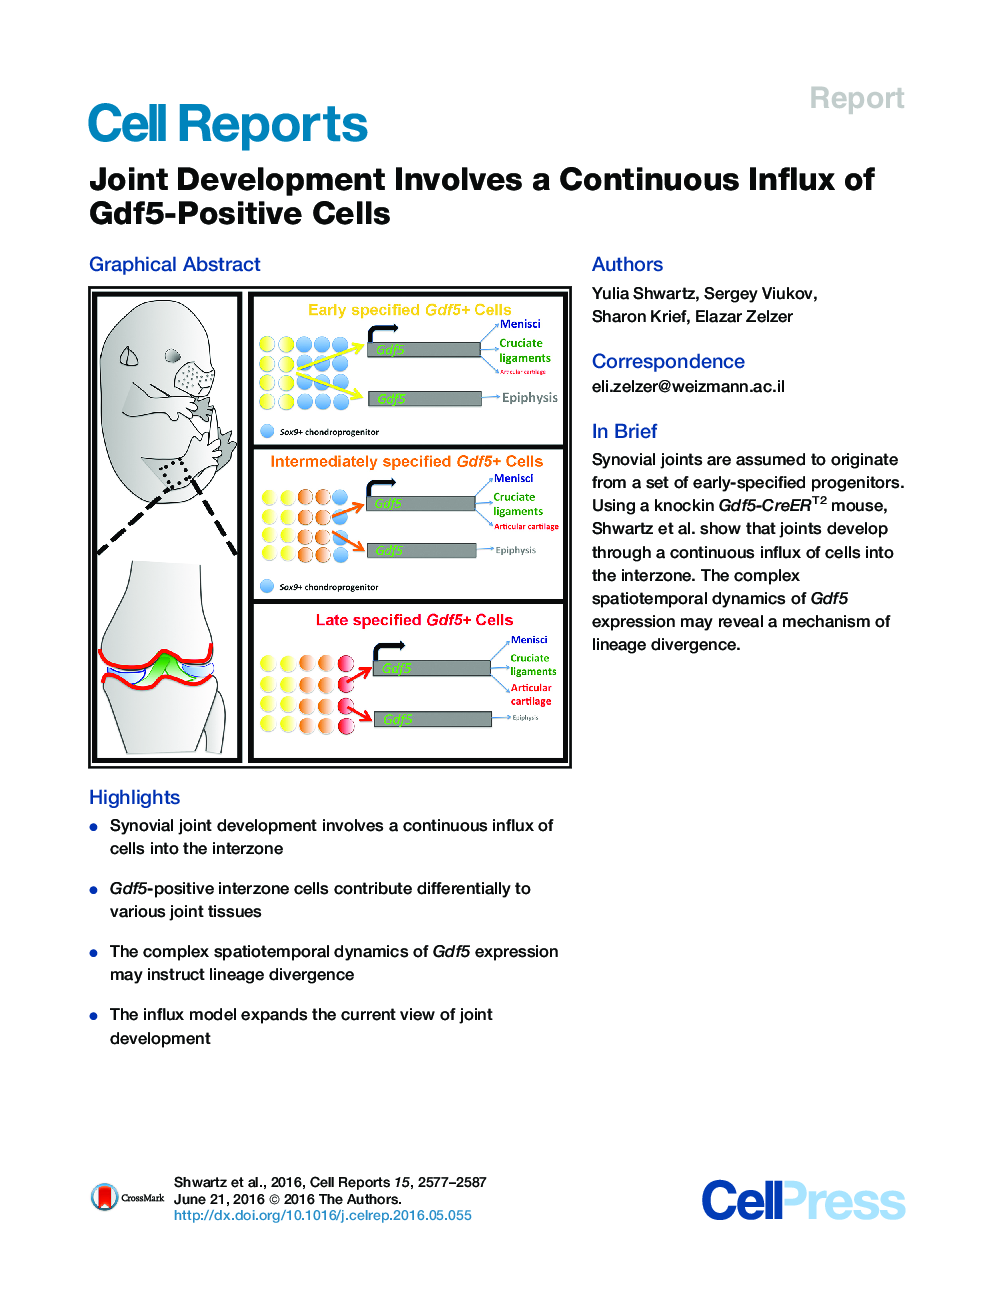 Joint Development Involves a Continuous Influx of Gdf5-Positive Cells